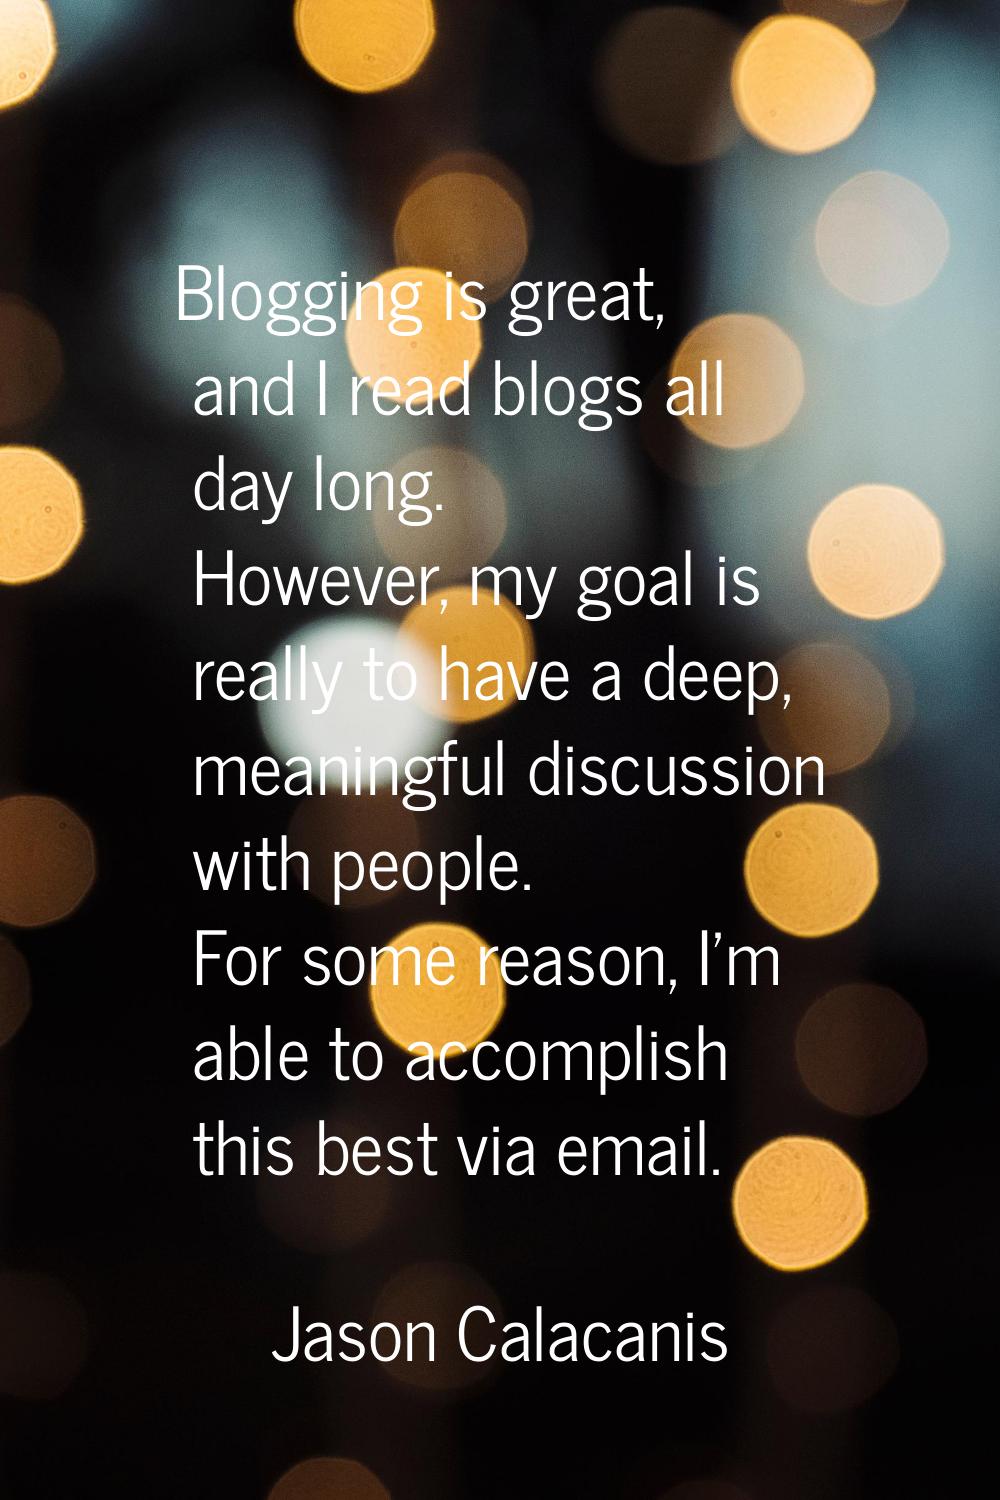 Blogging is great, and I read blogs all day long. However, my goal is really to have a deep, meanin